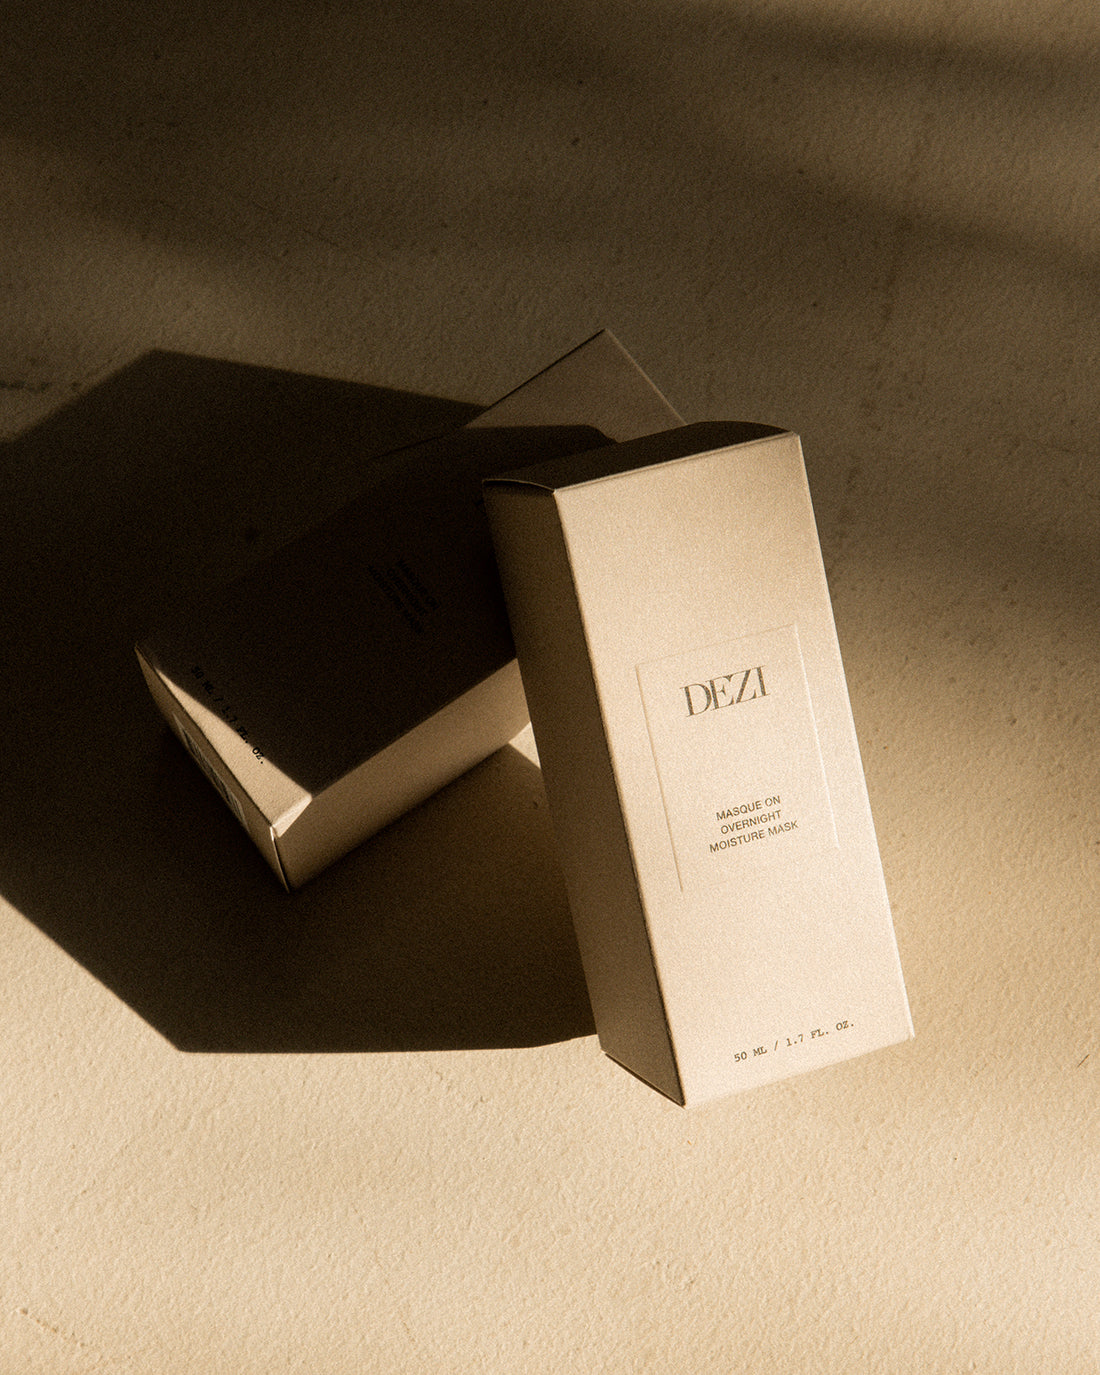 This shows two DEZI SKIN moisture mask boxes leaning on each other. The sunlight is hitting them, casting long dark shadows on the stone floor. 